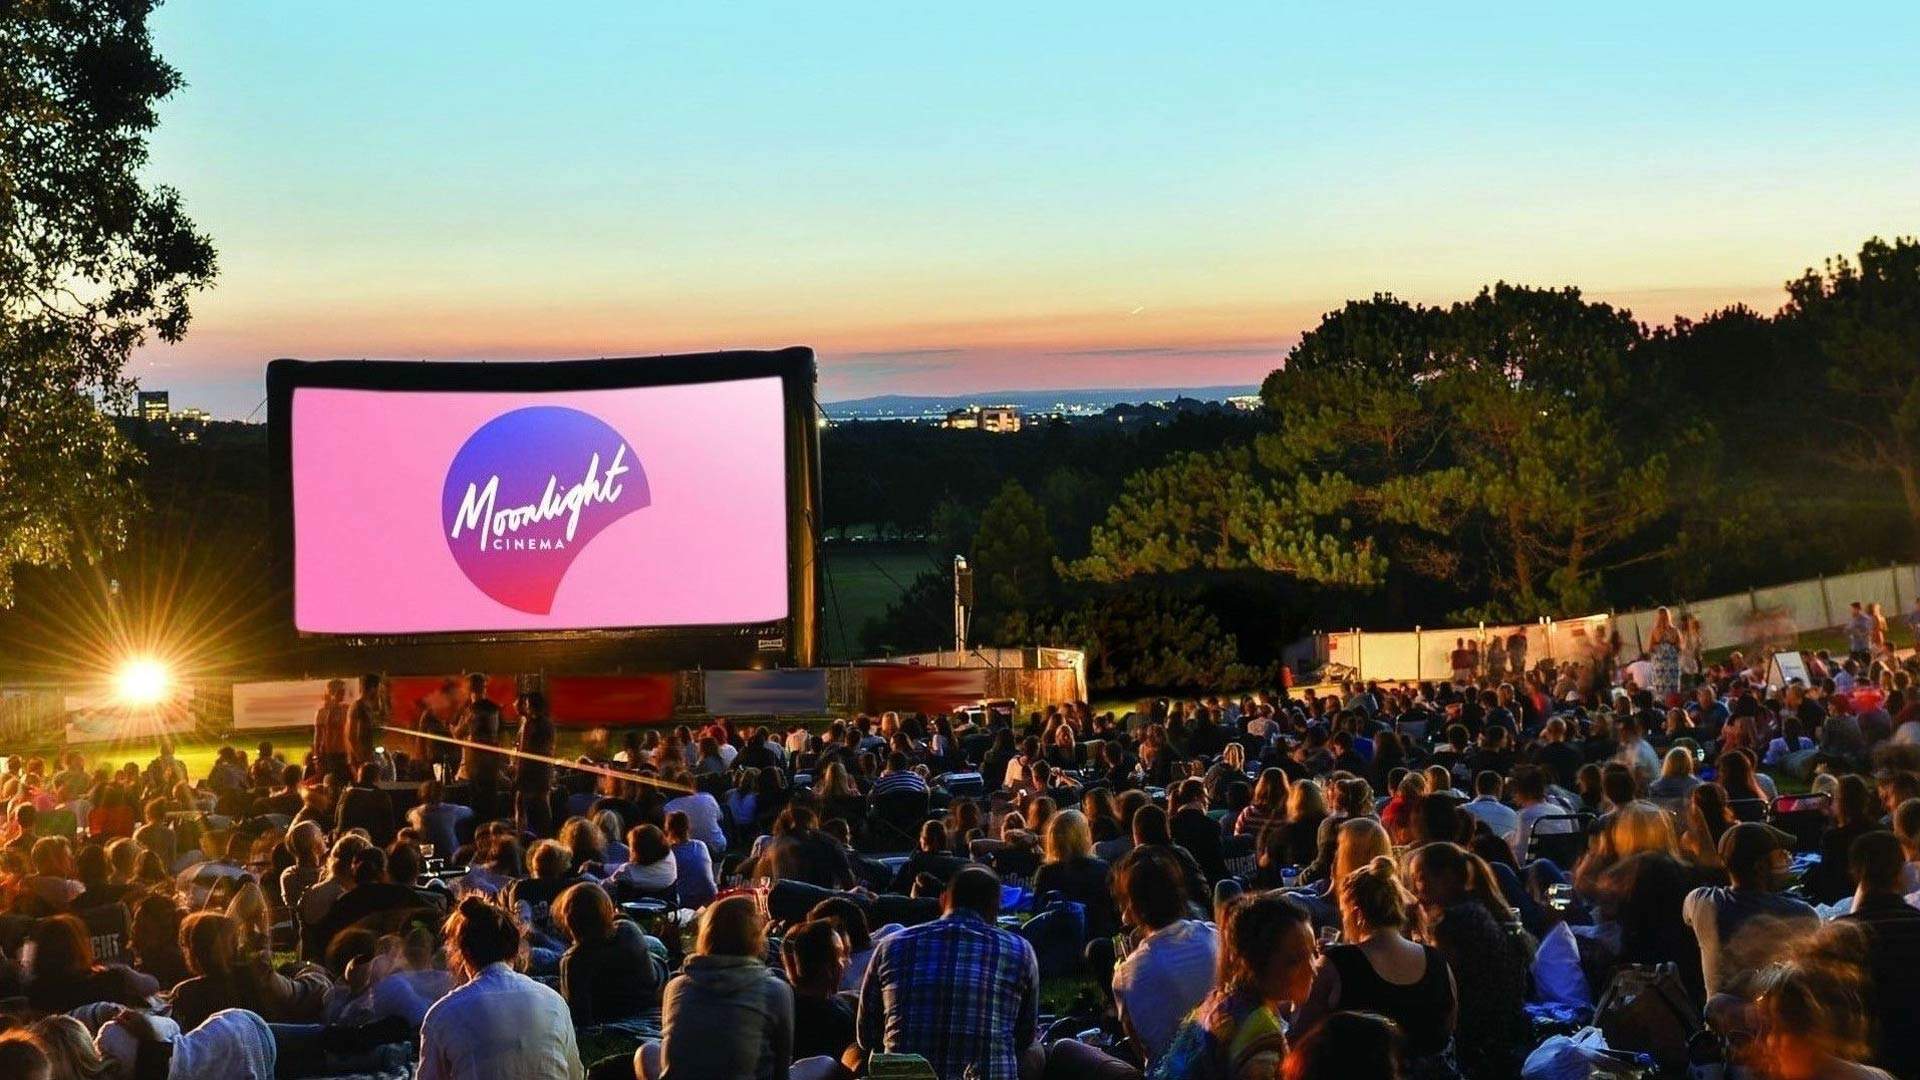 Moonlight Cinema Is Coming Back for the Summer